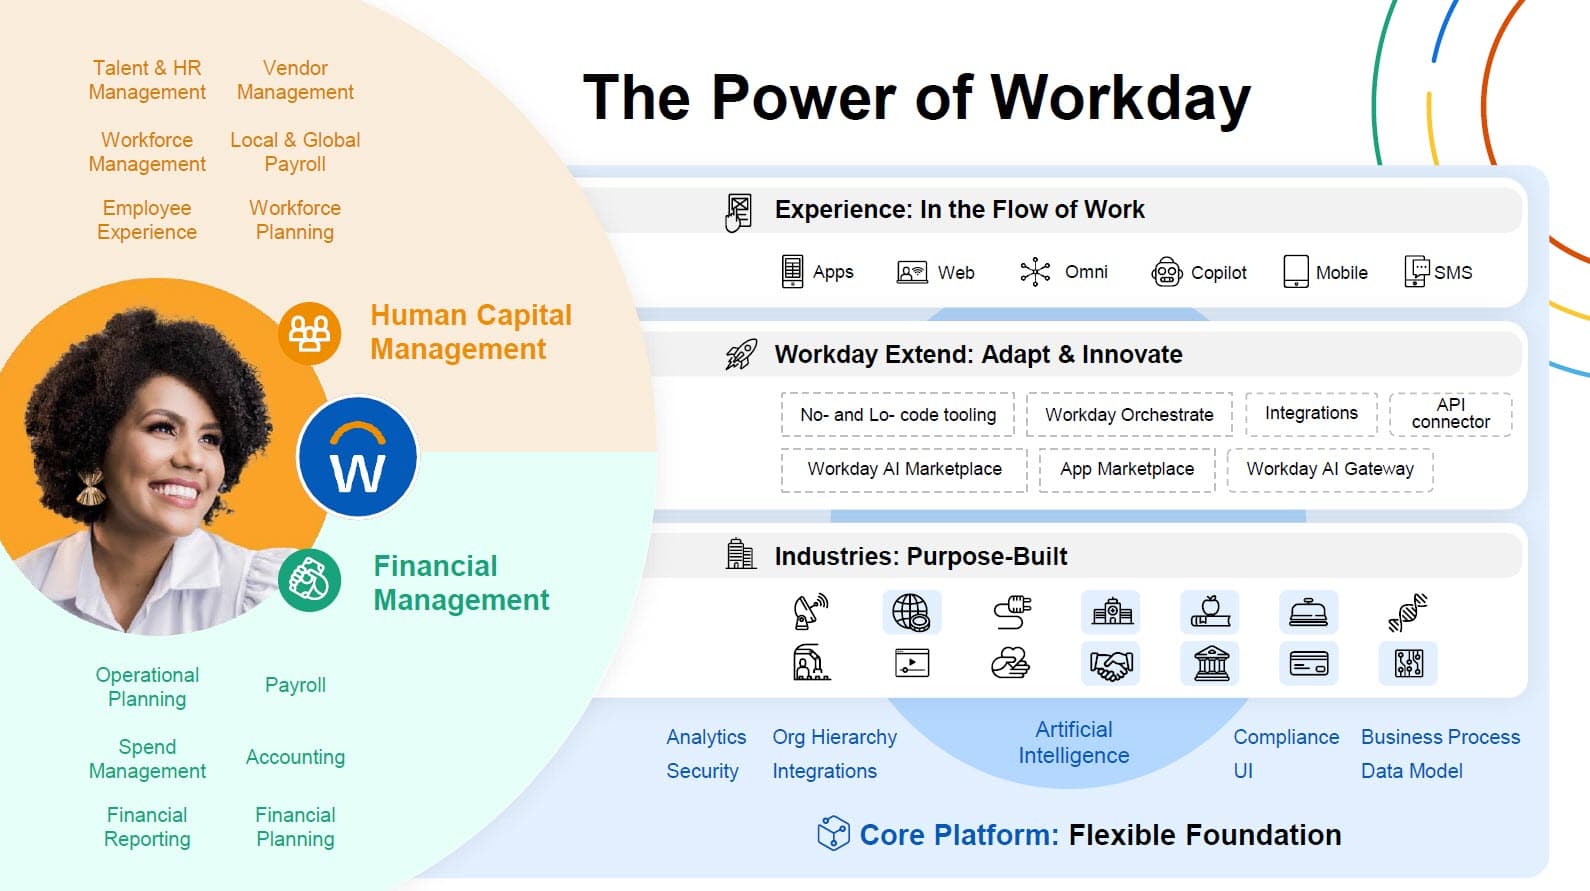 workday as a platform